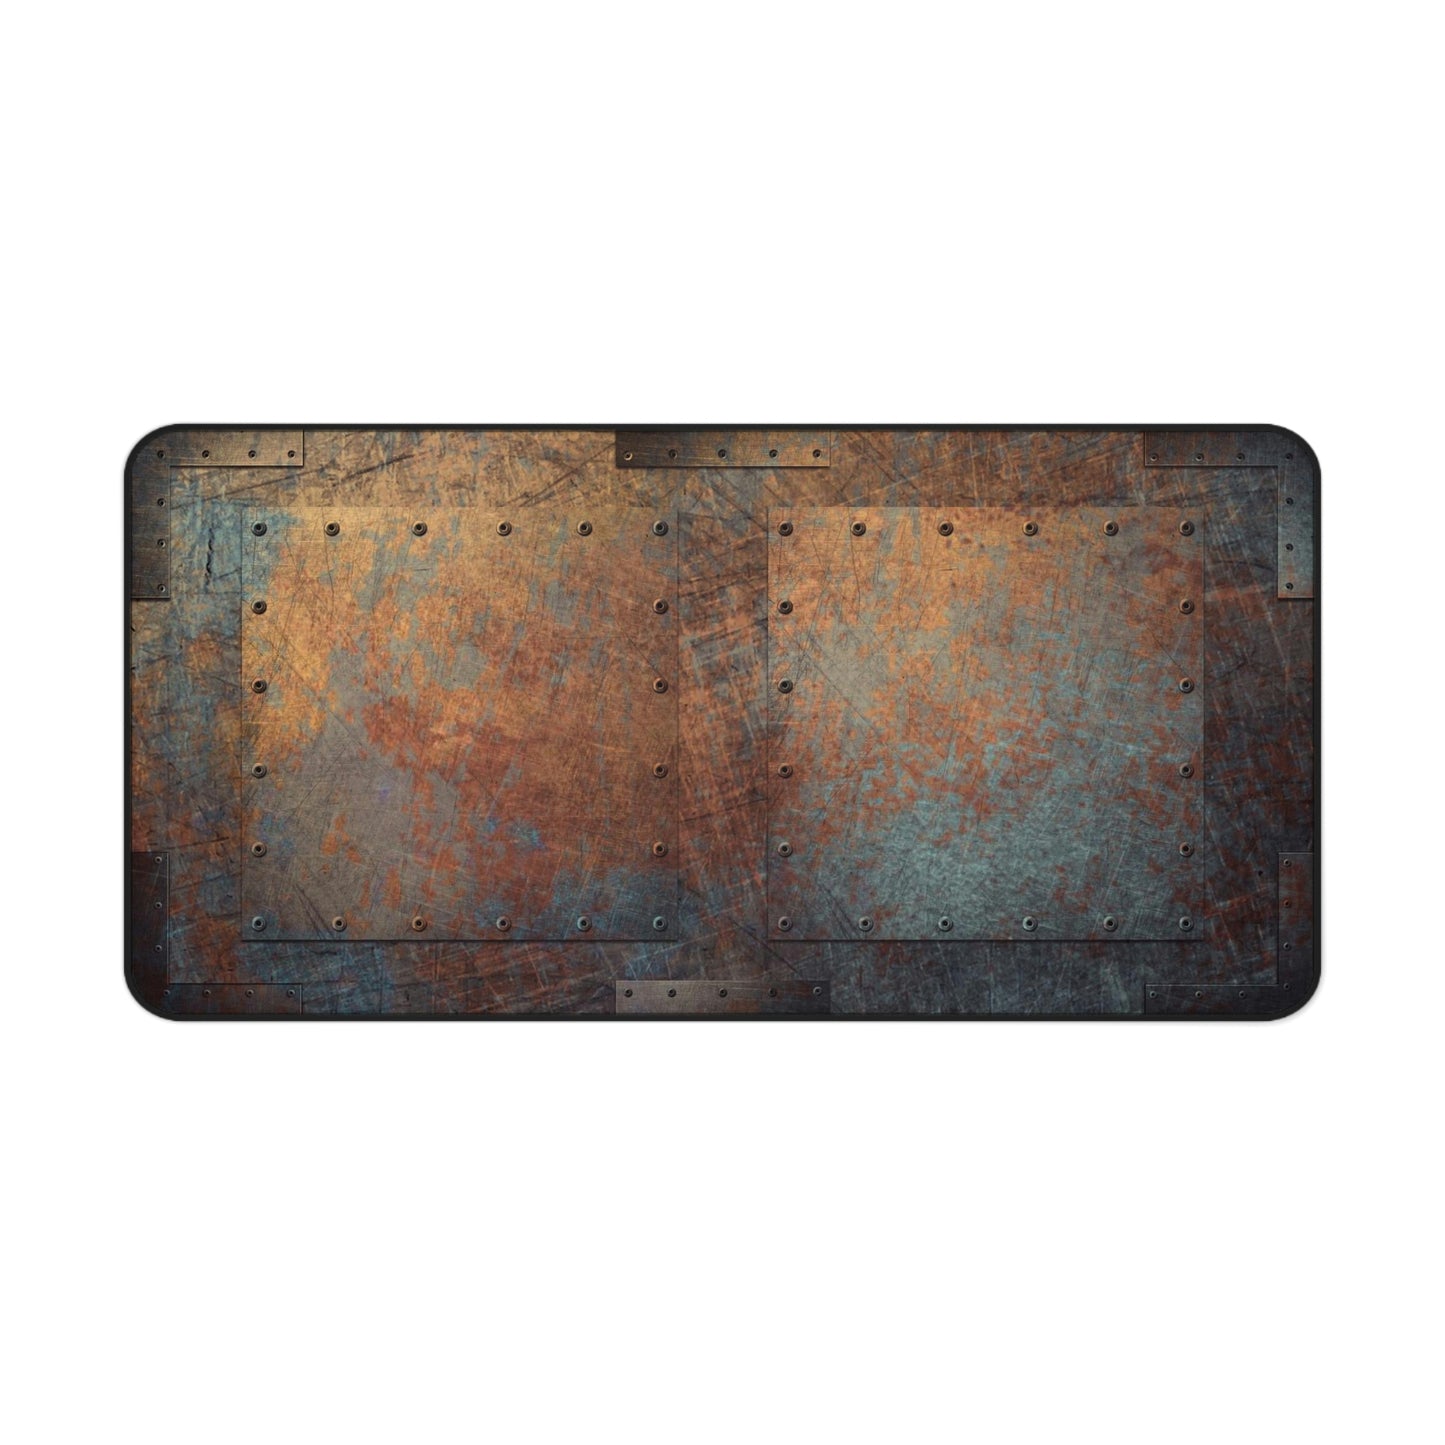 Steampunk Themed Desk Accessories - Patinated, Weather Beaten, Riveted Copper Sheets Print on Neoprene Desk Mat 15.5 x 31